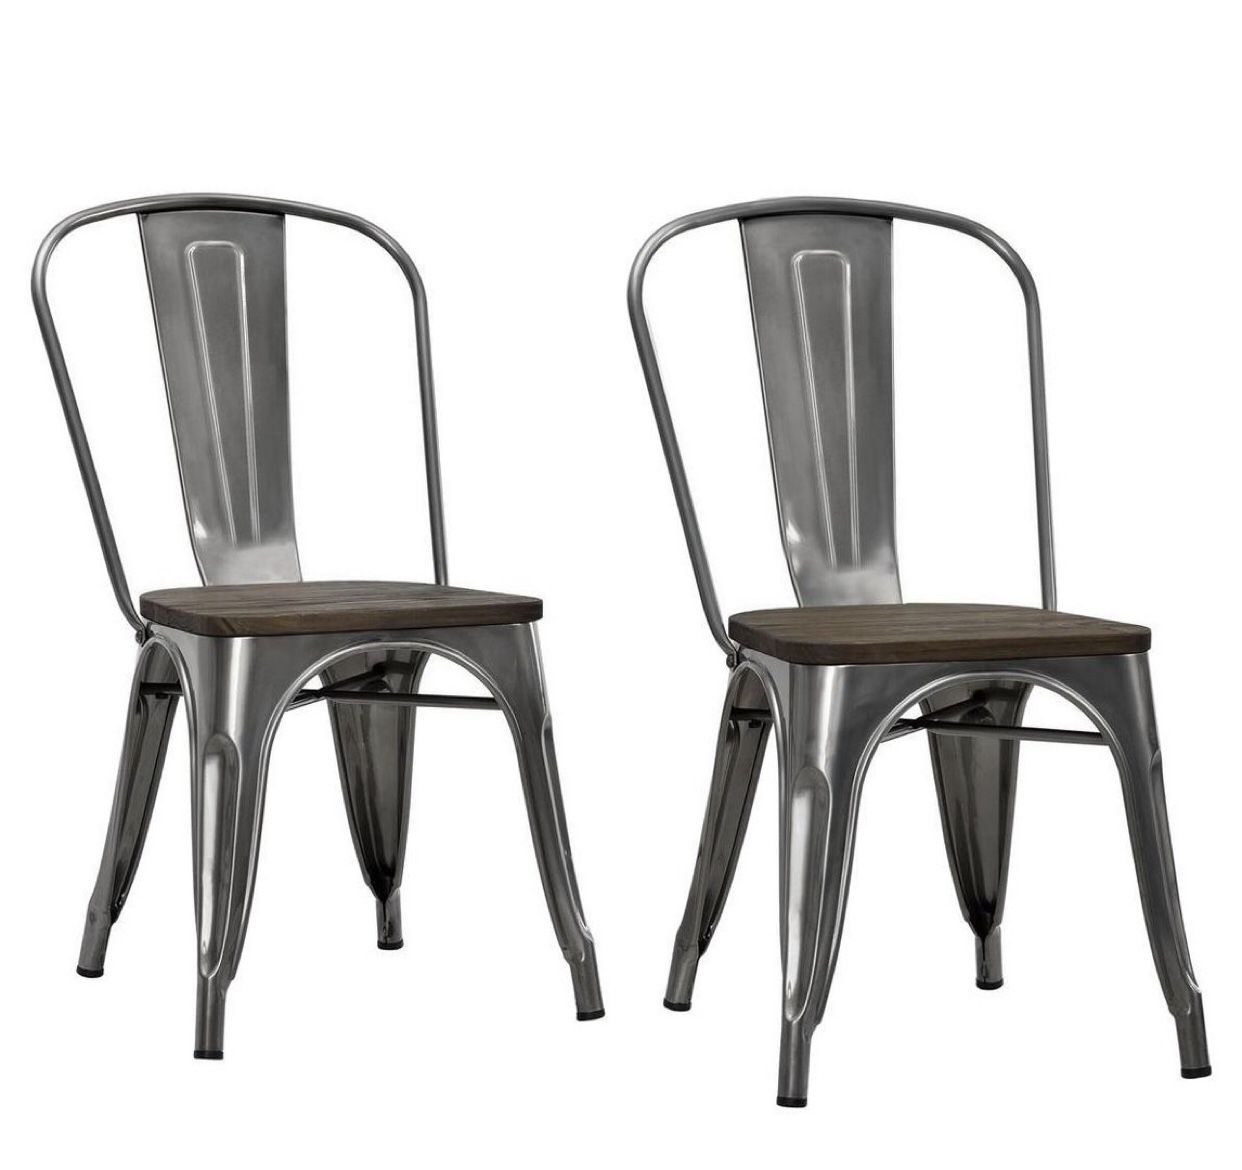 Metal gray dining chair wood seat new